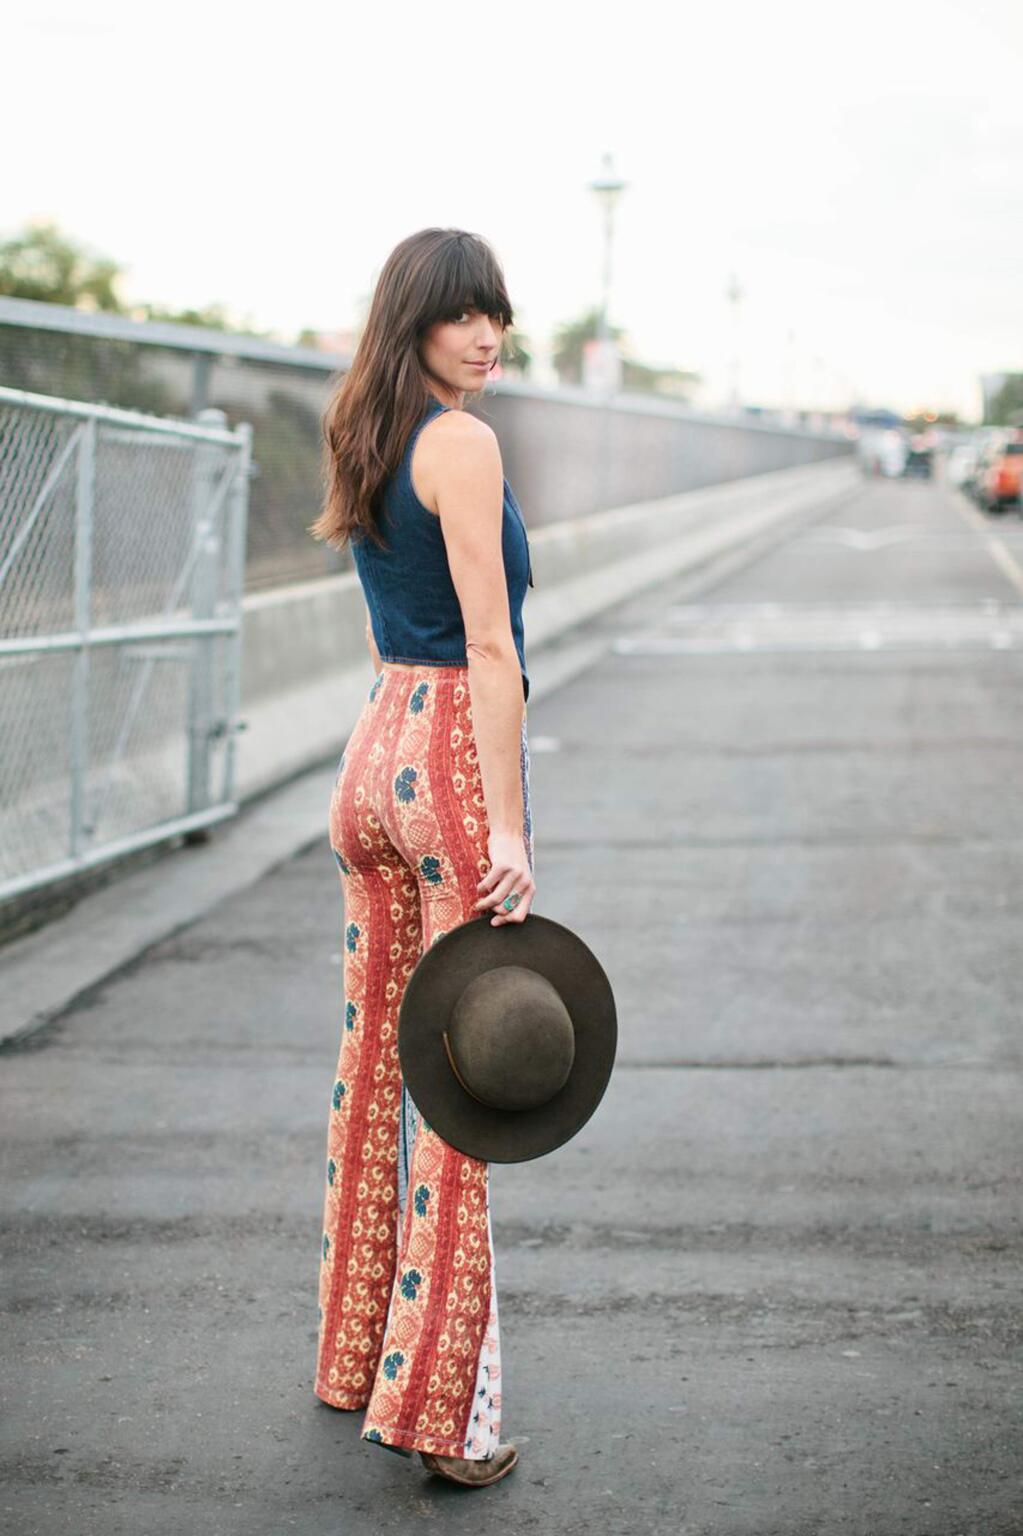 Nicki Bluhm, Marin County singer, musician and songwriter, performs this weekend in Petaluma with her band, The Gramblers. (Taryn Kent)